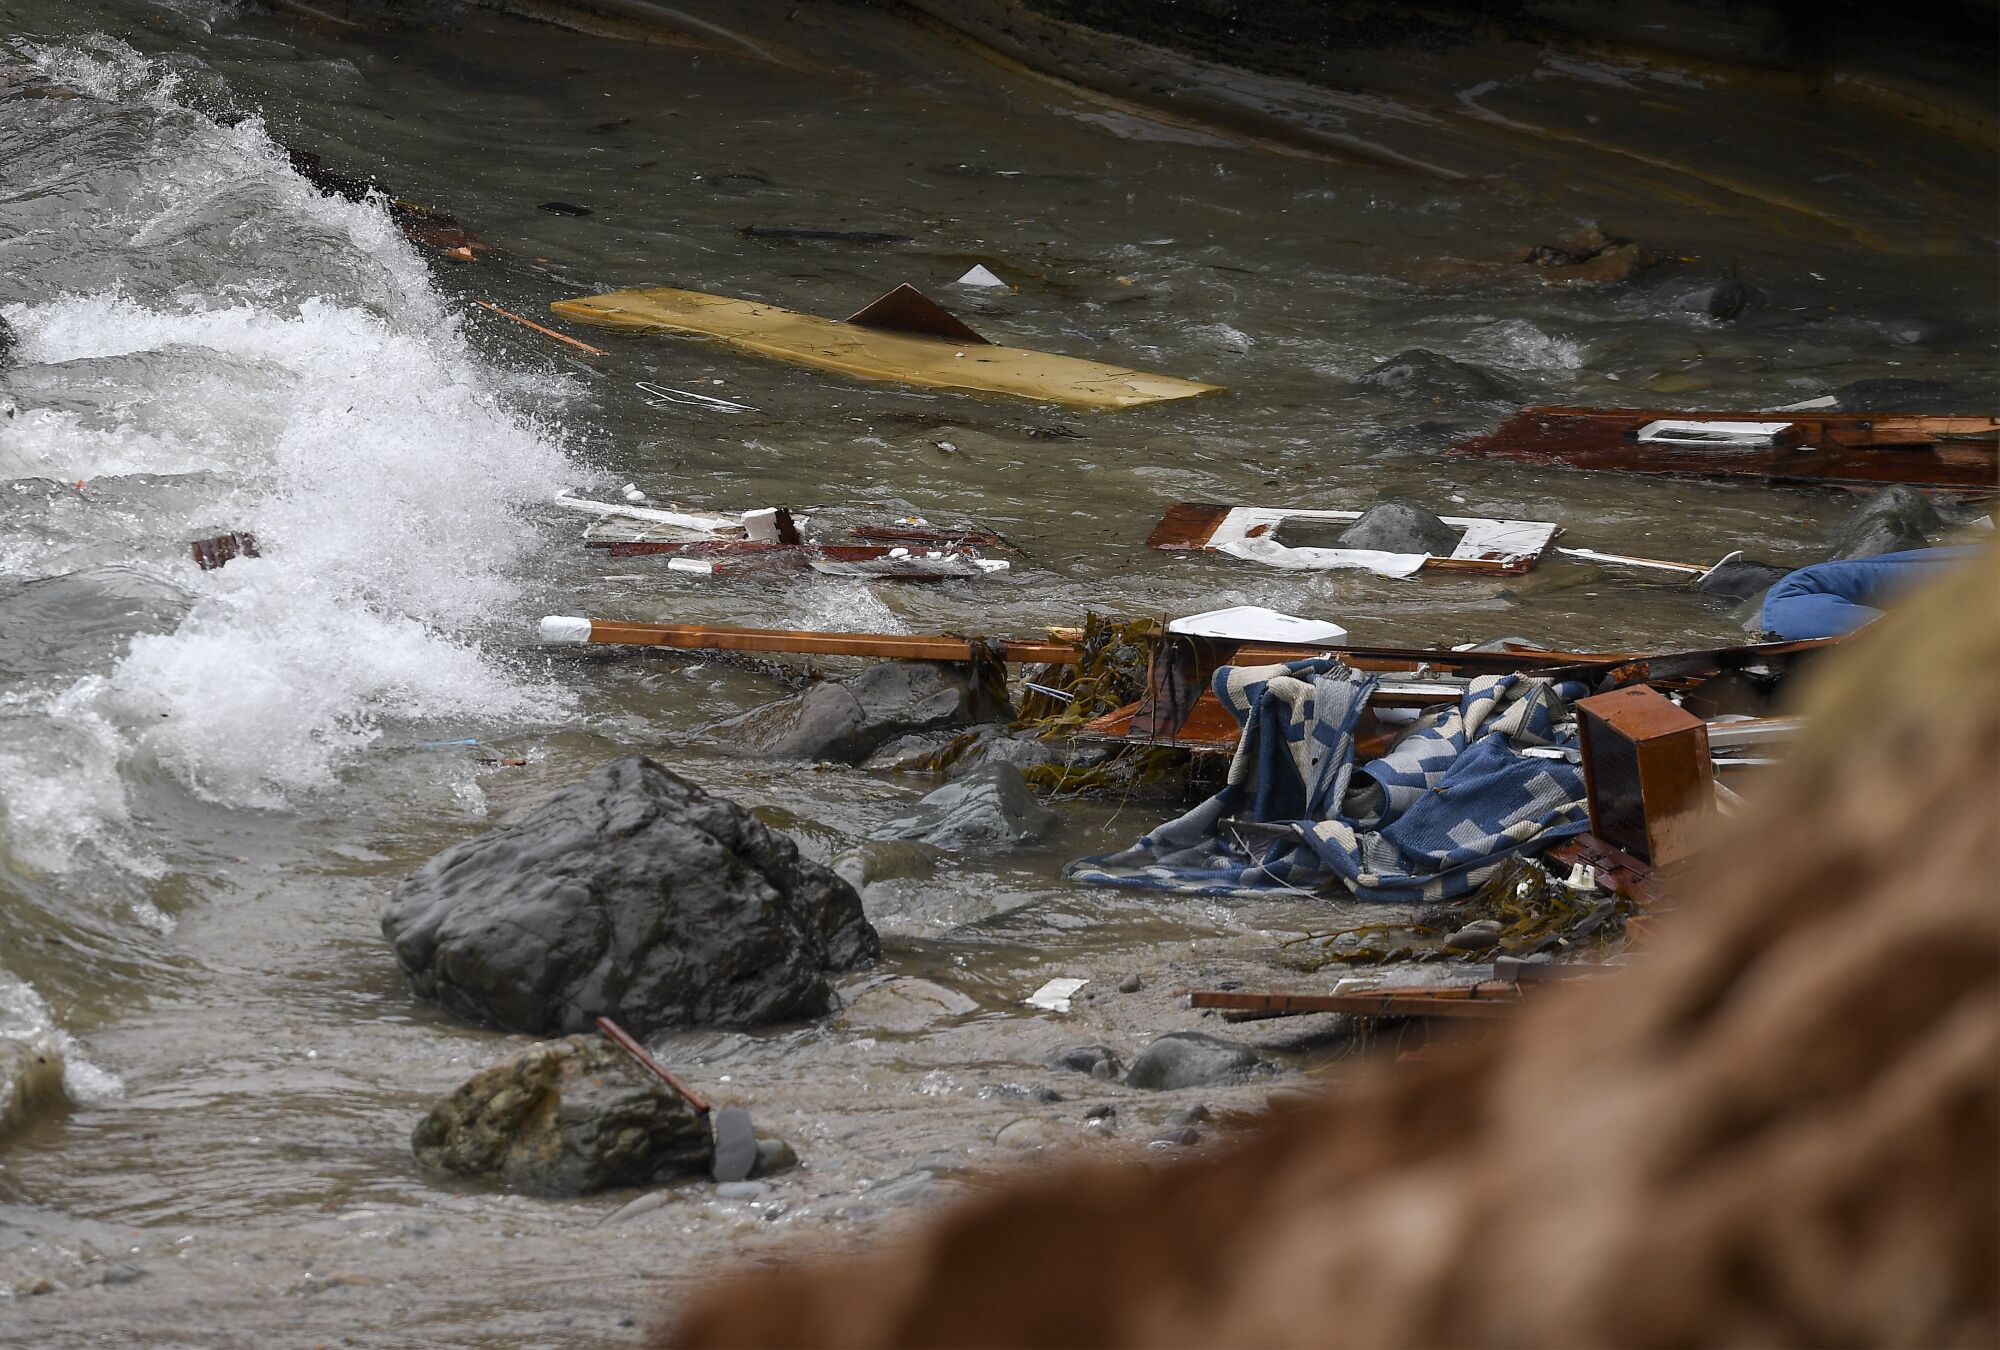 Wreckage and debris from the Salty Lady washes ashore at Cabrillo National Monument on May 2, 2021.